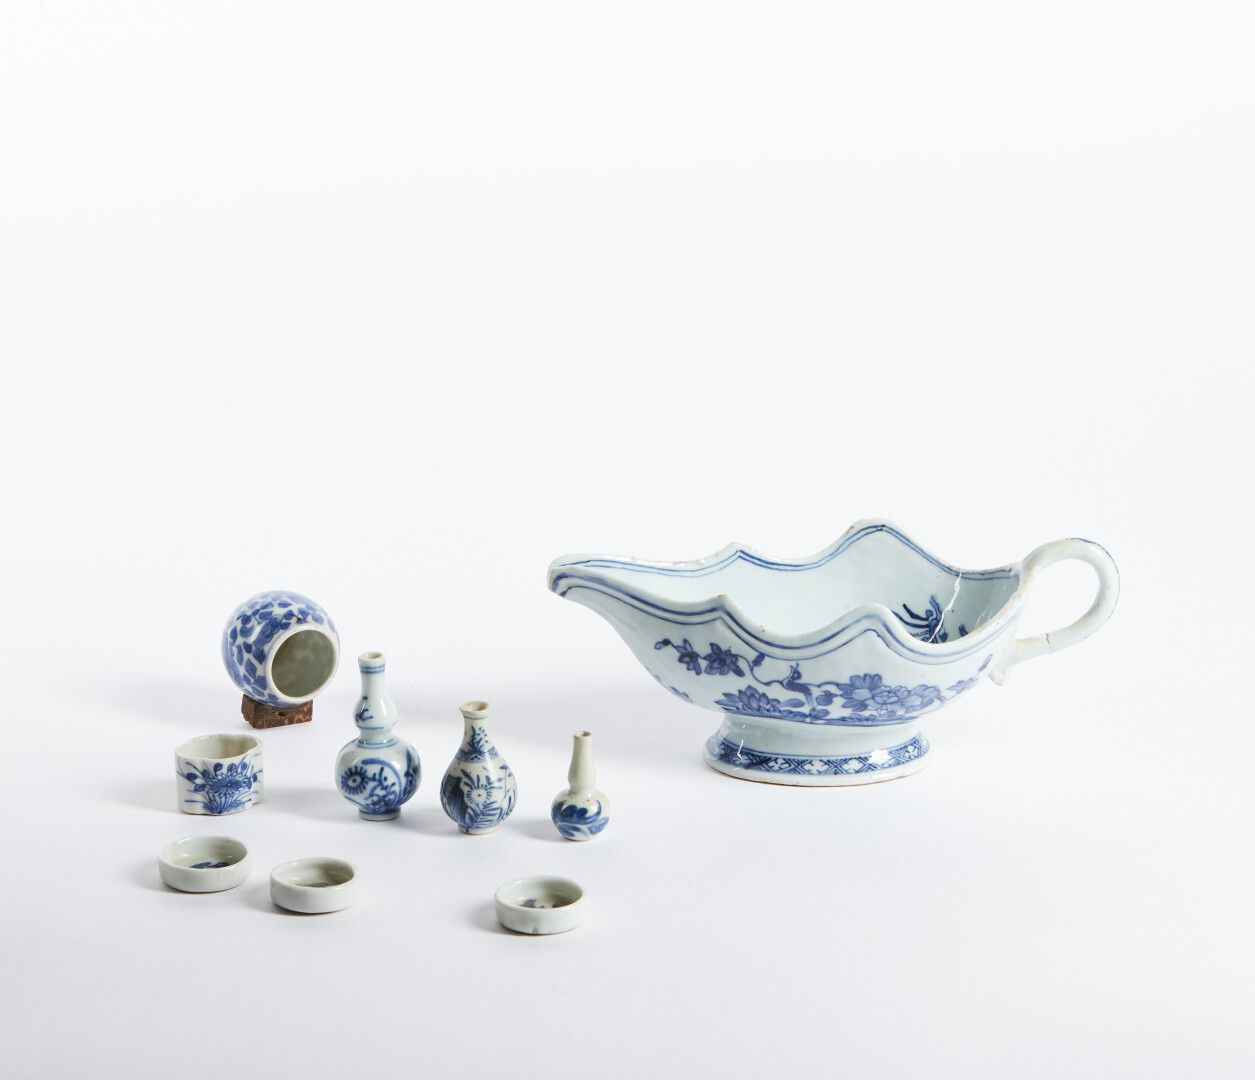 Null CHINA

Lot in porcelain with blue monochrome decoration of flowers includin&hellip;